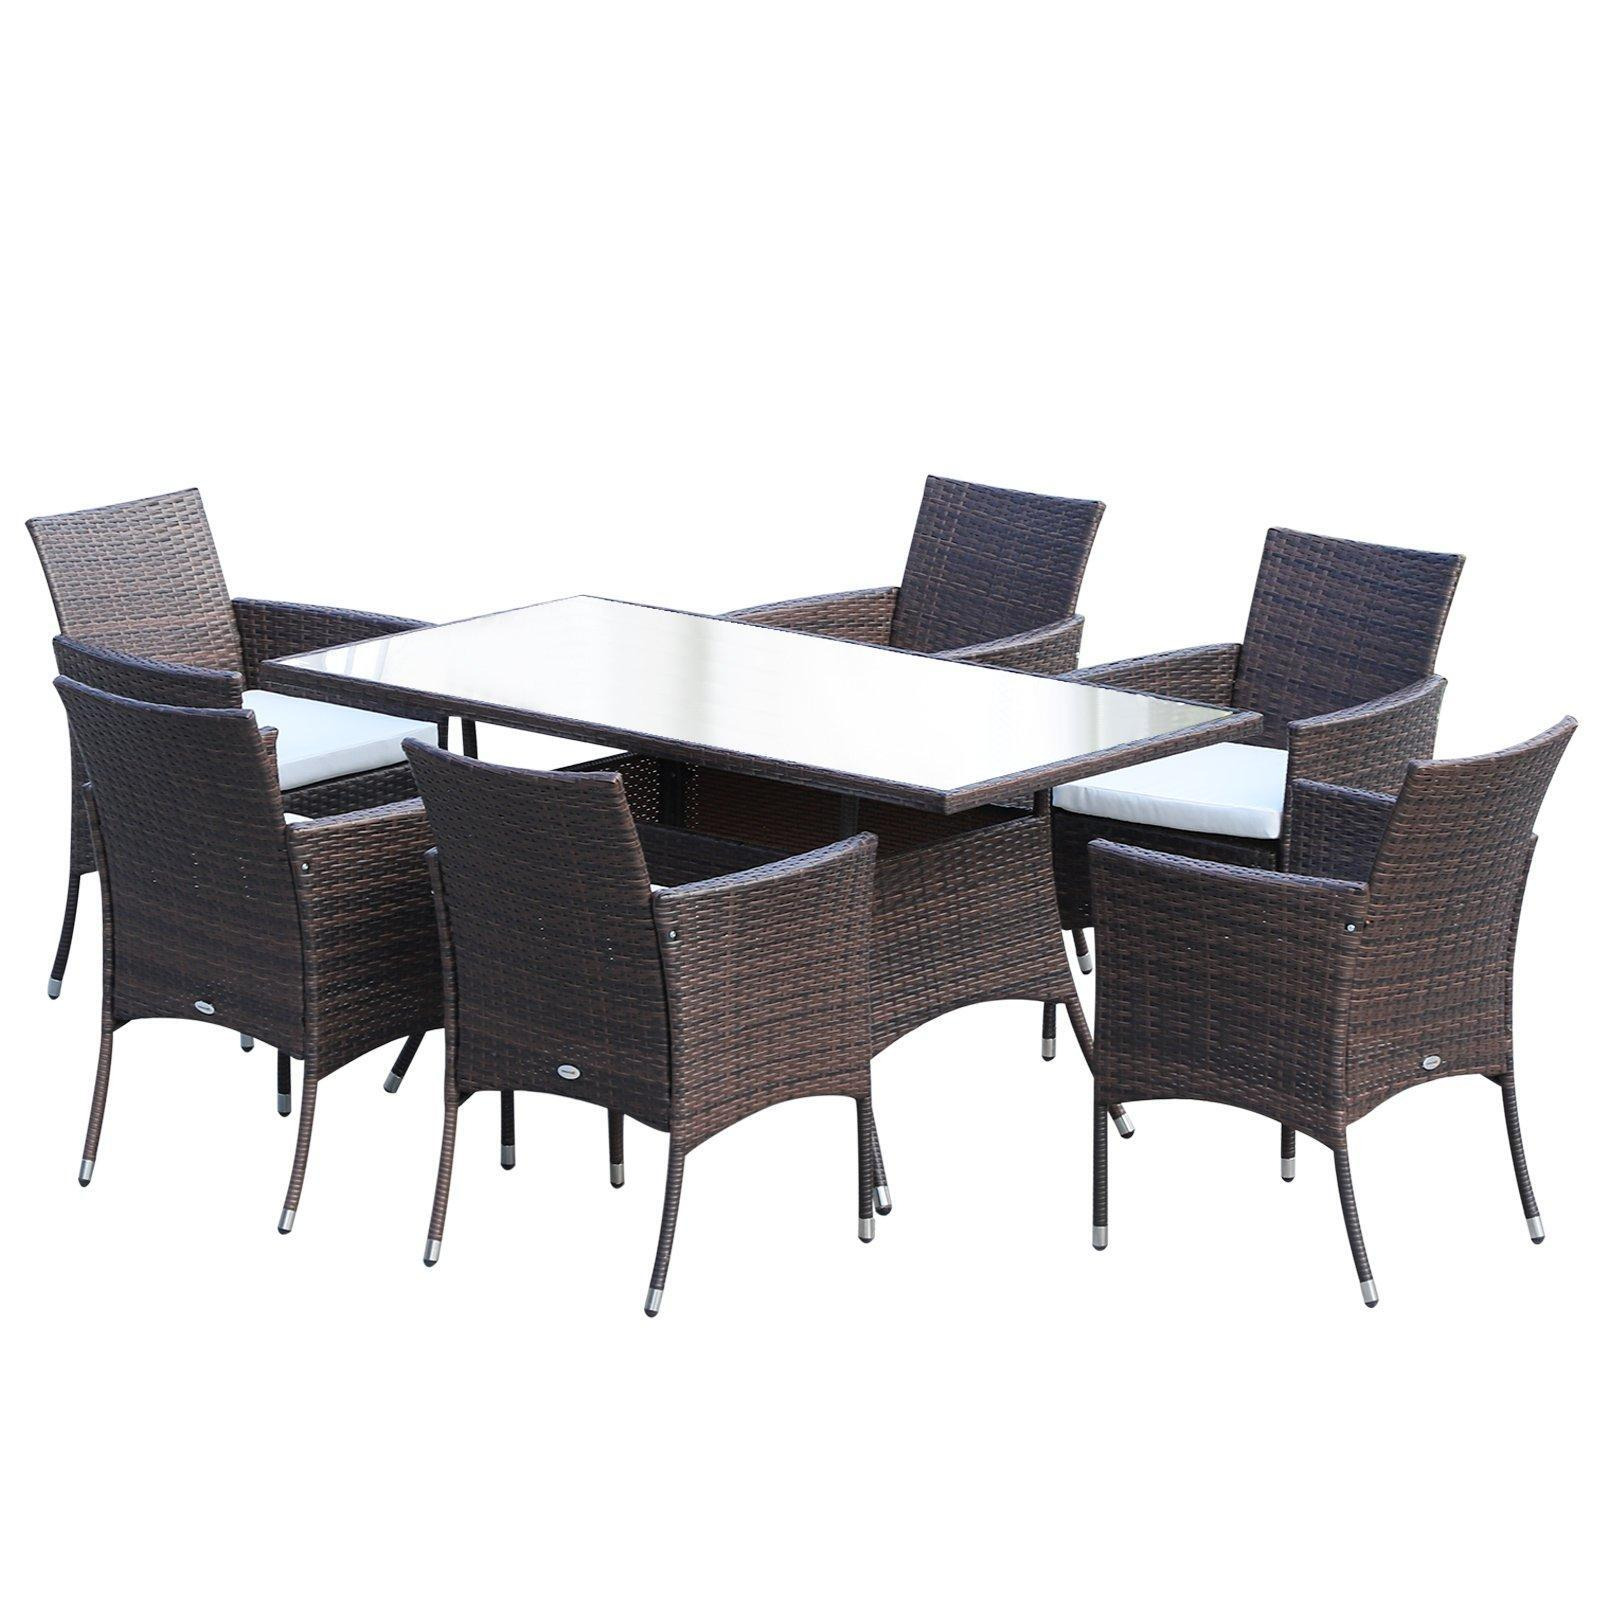 Rattan Dining Set Conservatory 7pcs Garden Furniture Seaters Patio Weave Outdoor - image 1